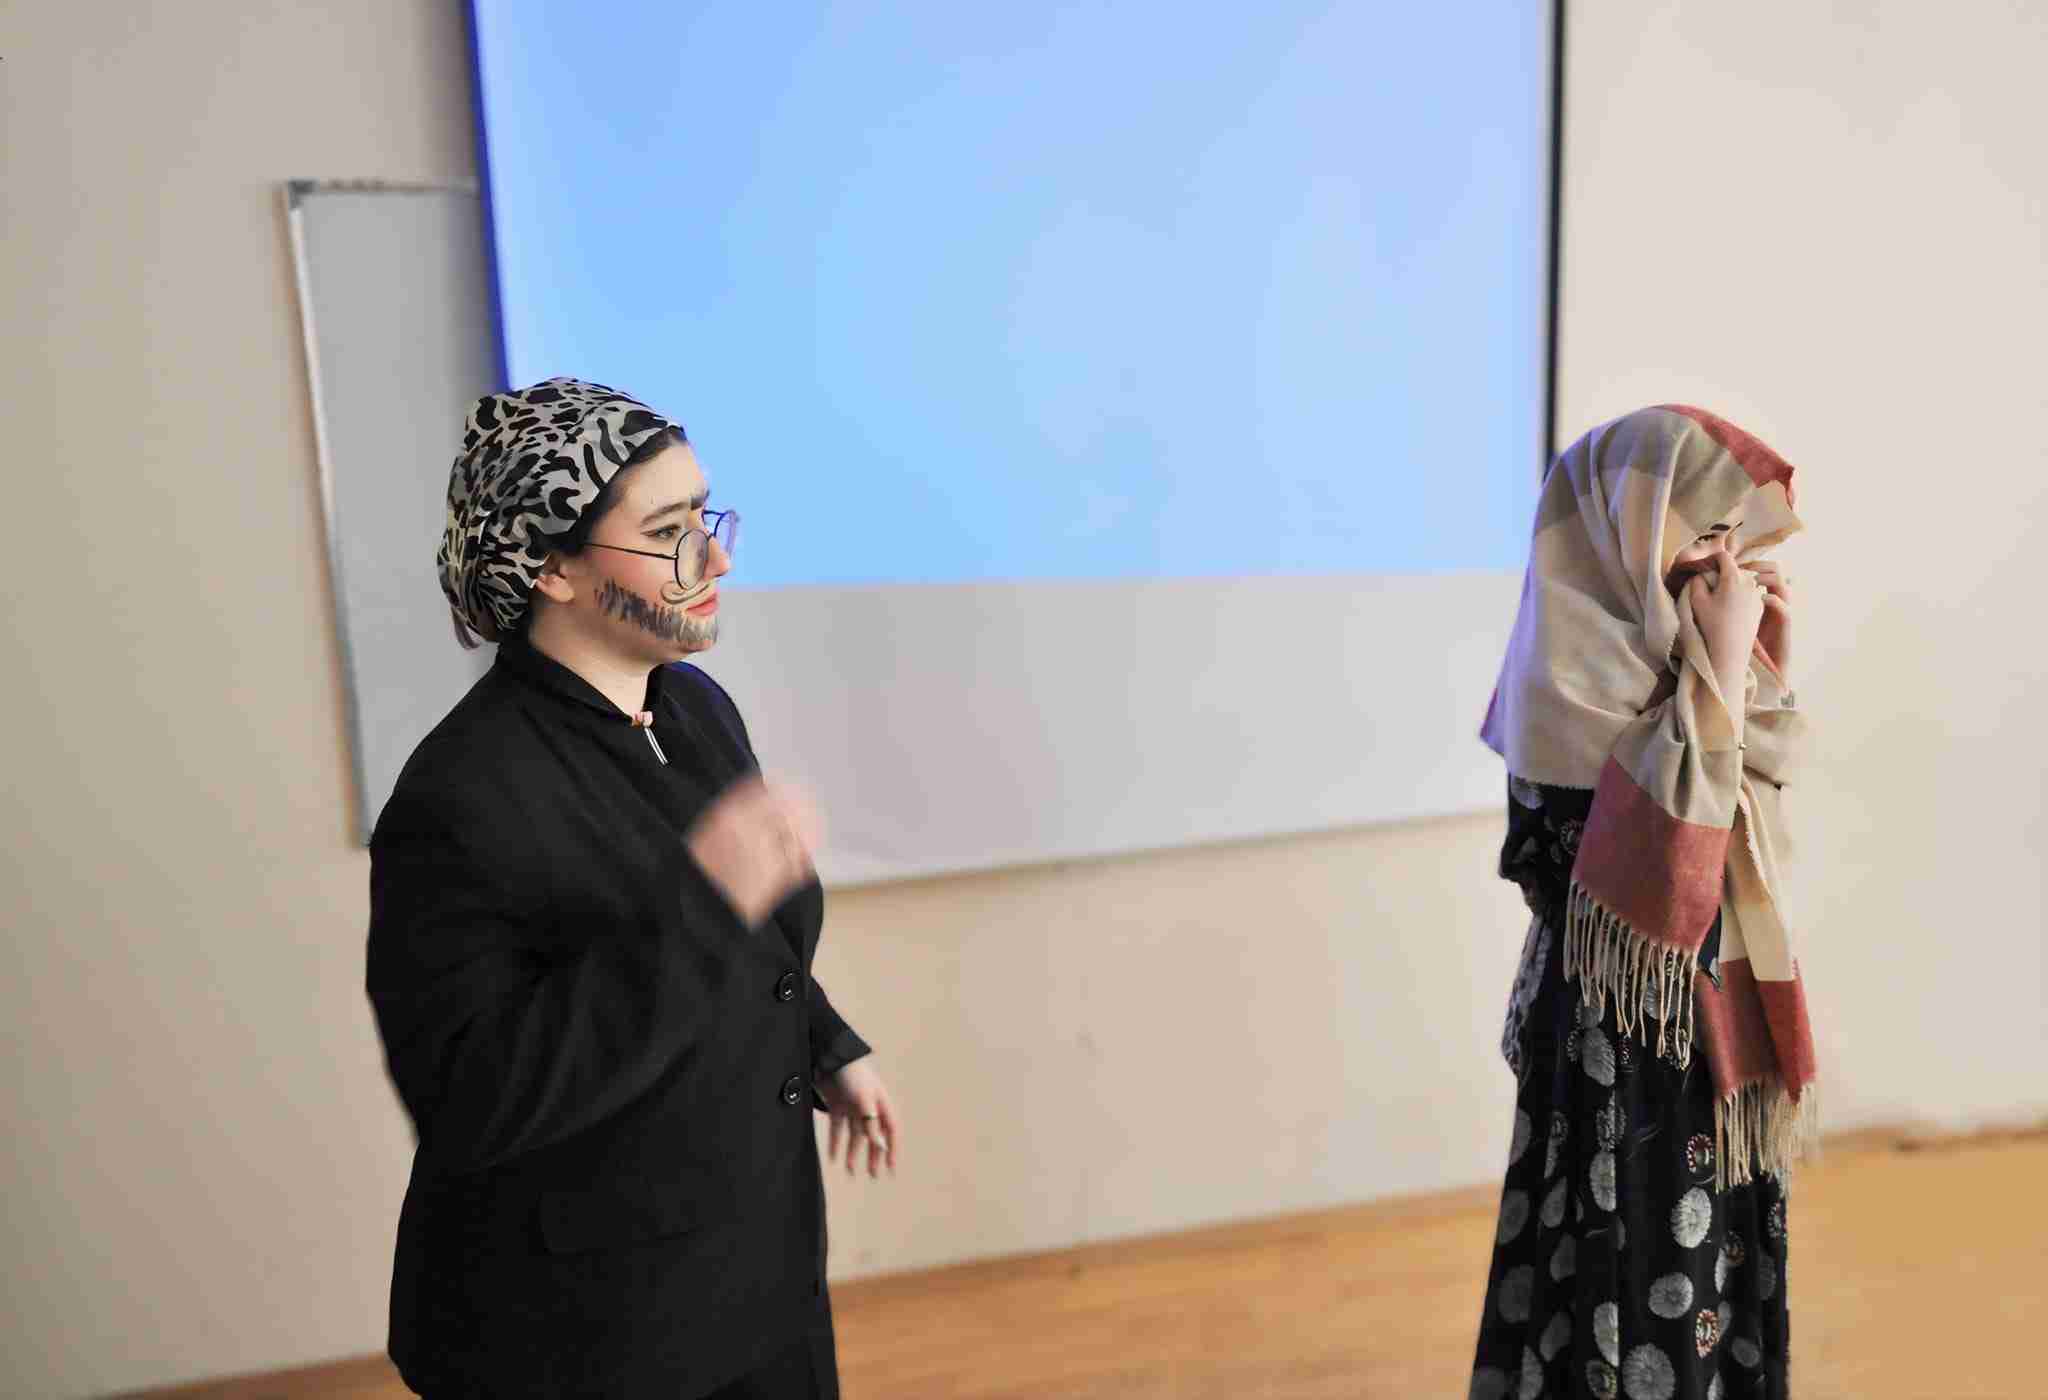 An open class was held for students of the Faculty of Humanities, Education and Languages at OYU